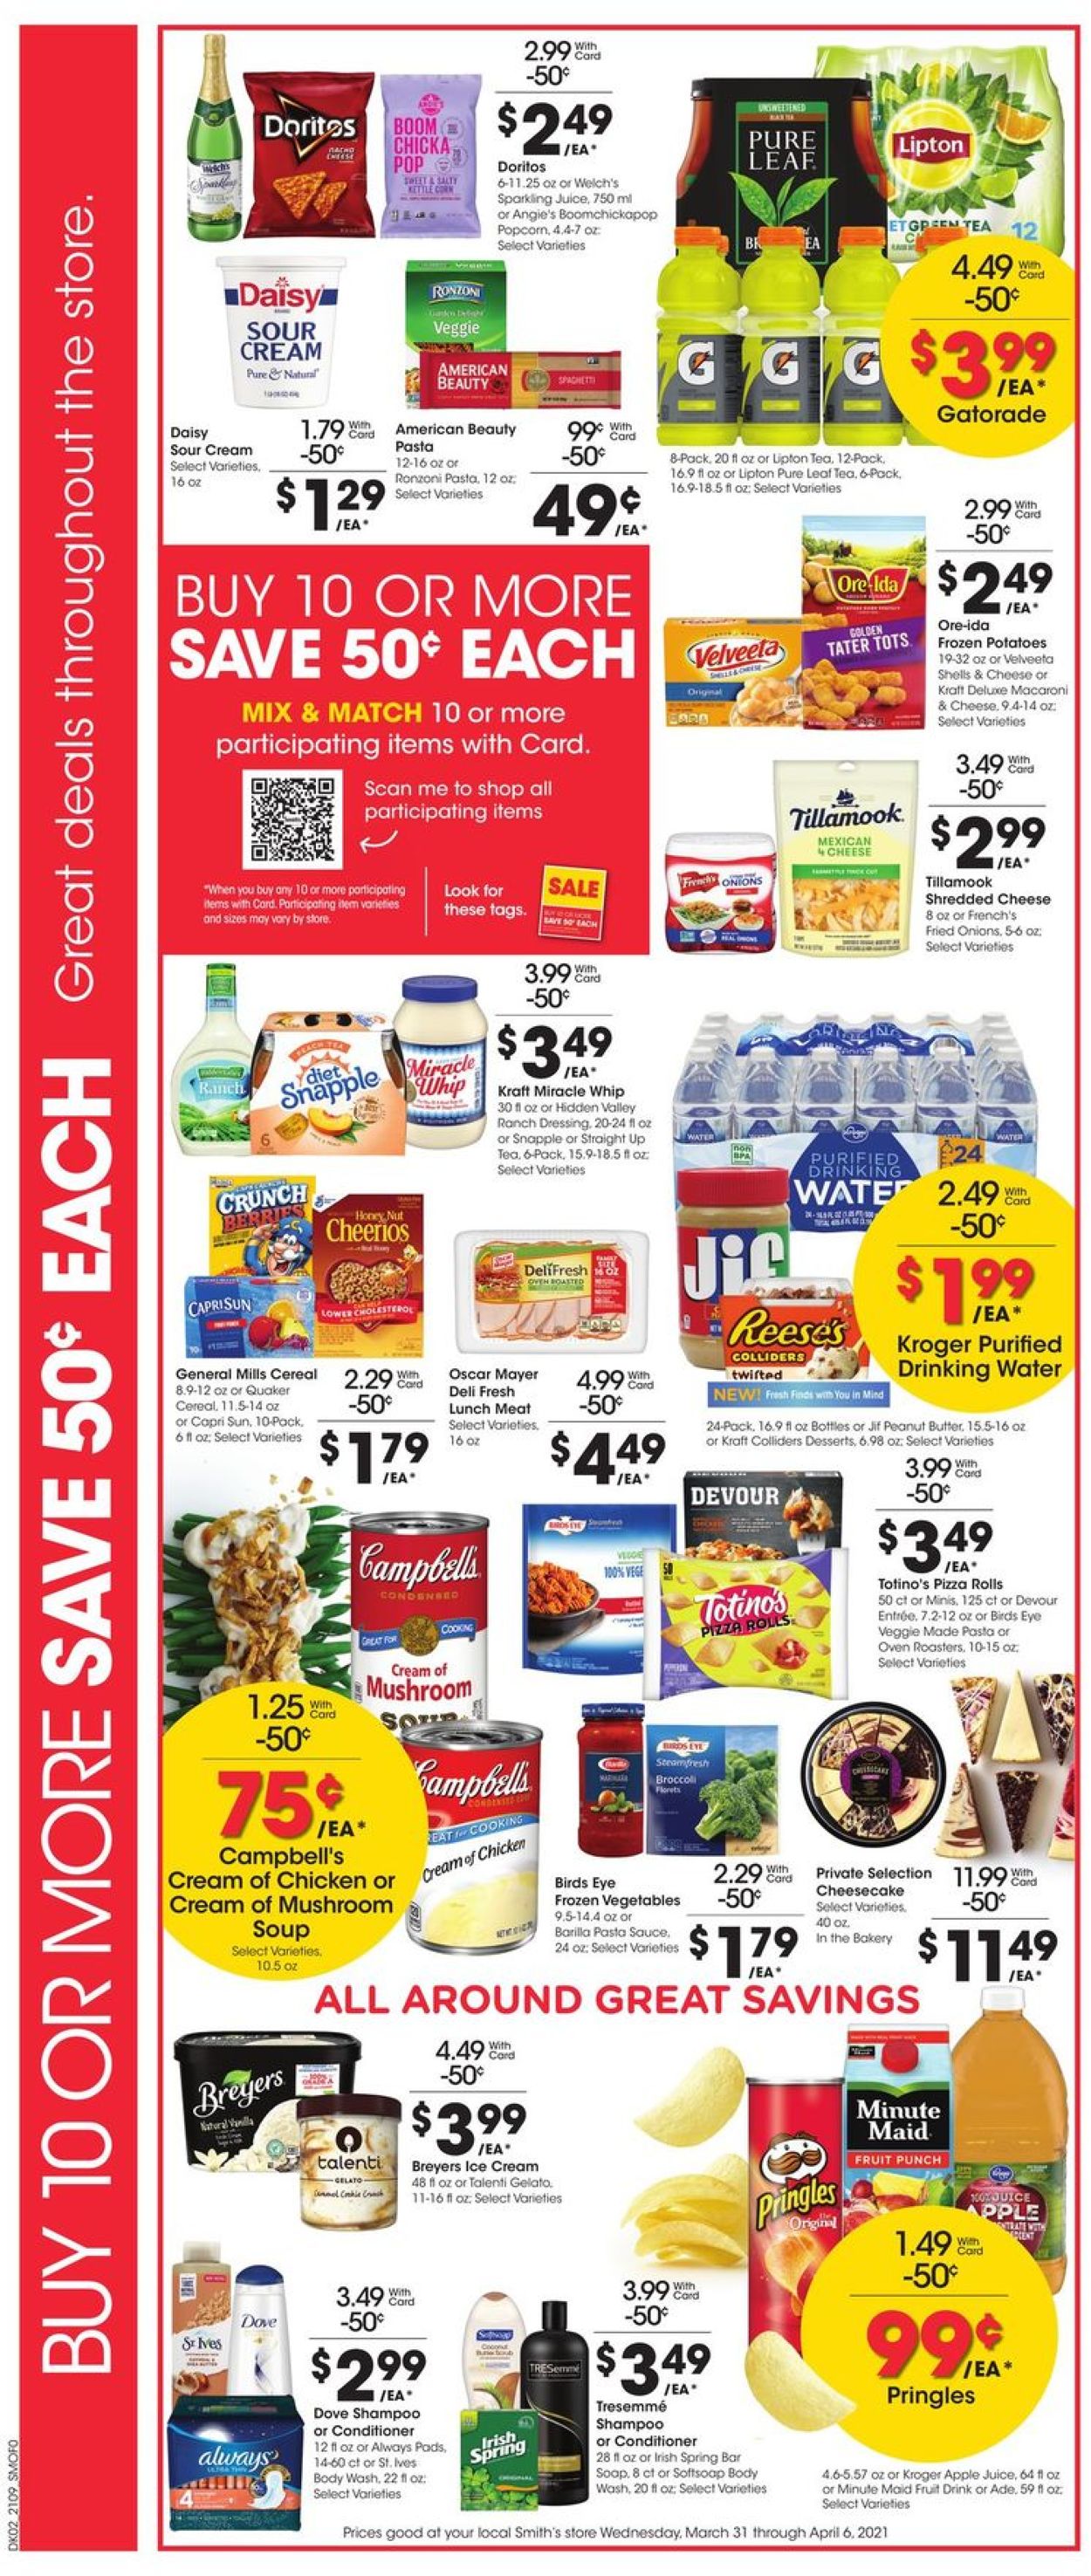 Smith's - Easter 2021 Ad Weekly Ad Circular - valid 03/31-04/06/2021 (Page 3)